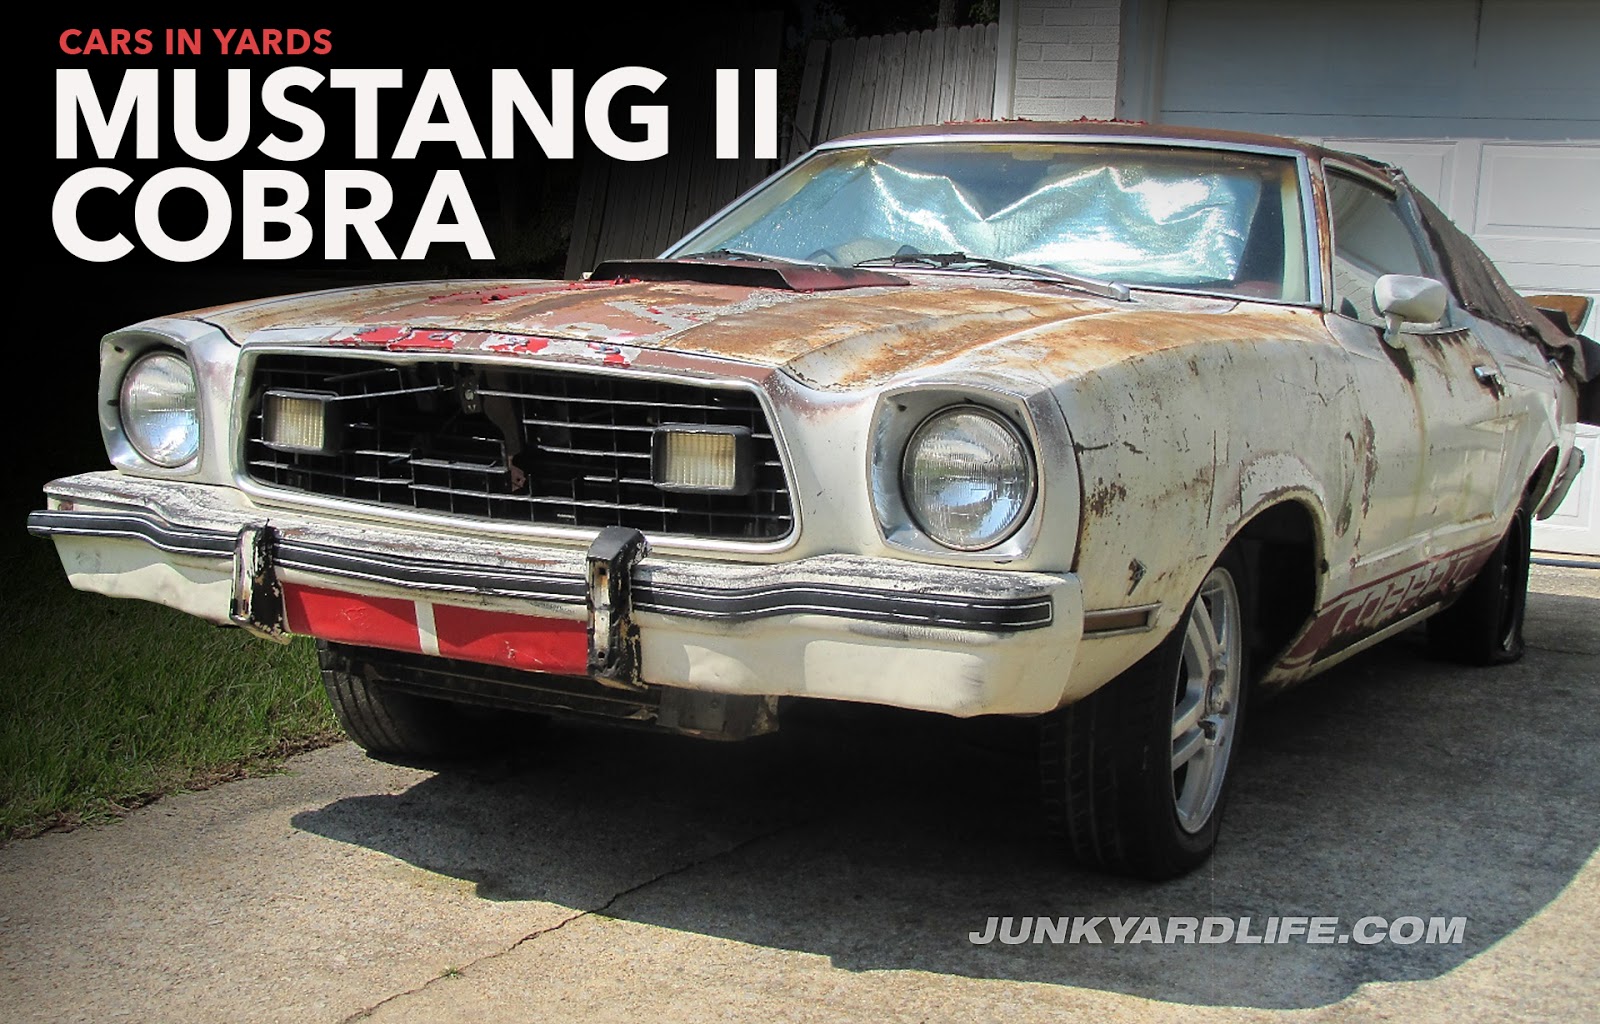 Junkyard Life: Classic Cars, Muscle Cars, Barn finds, Hot rods